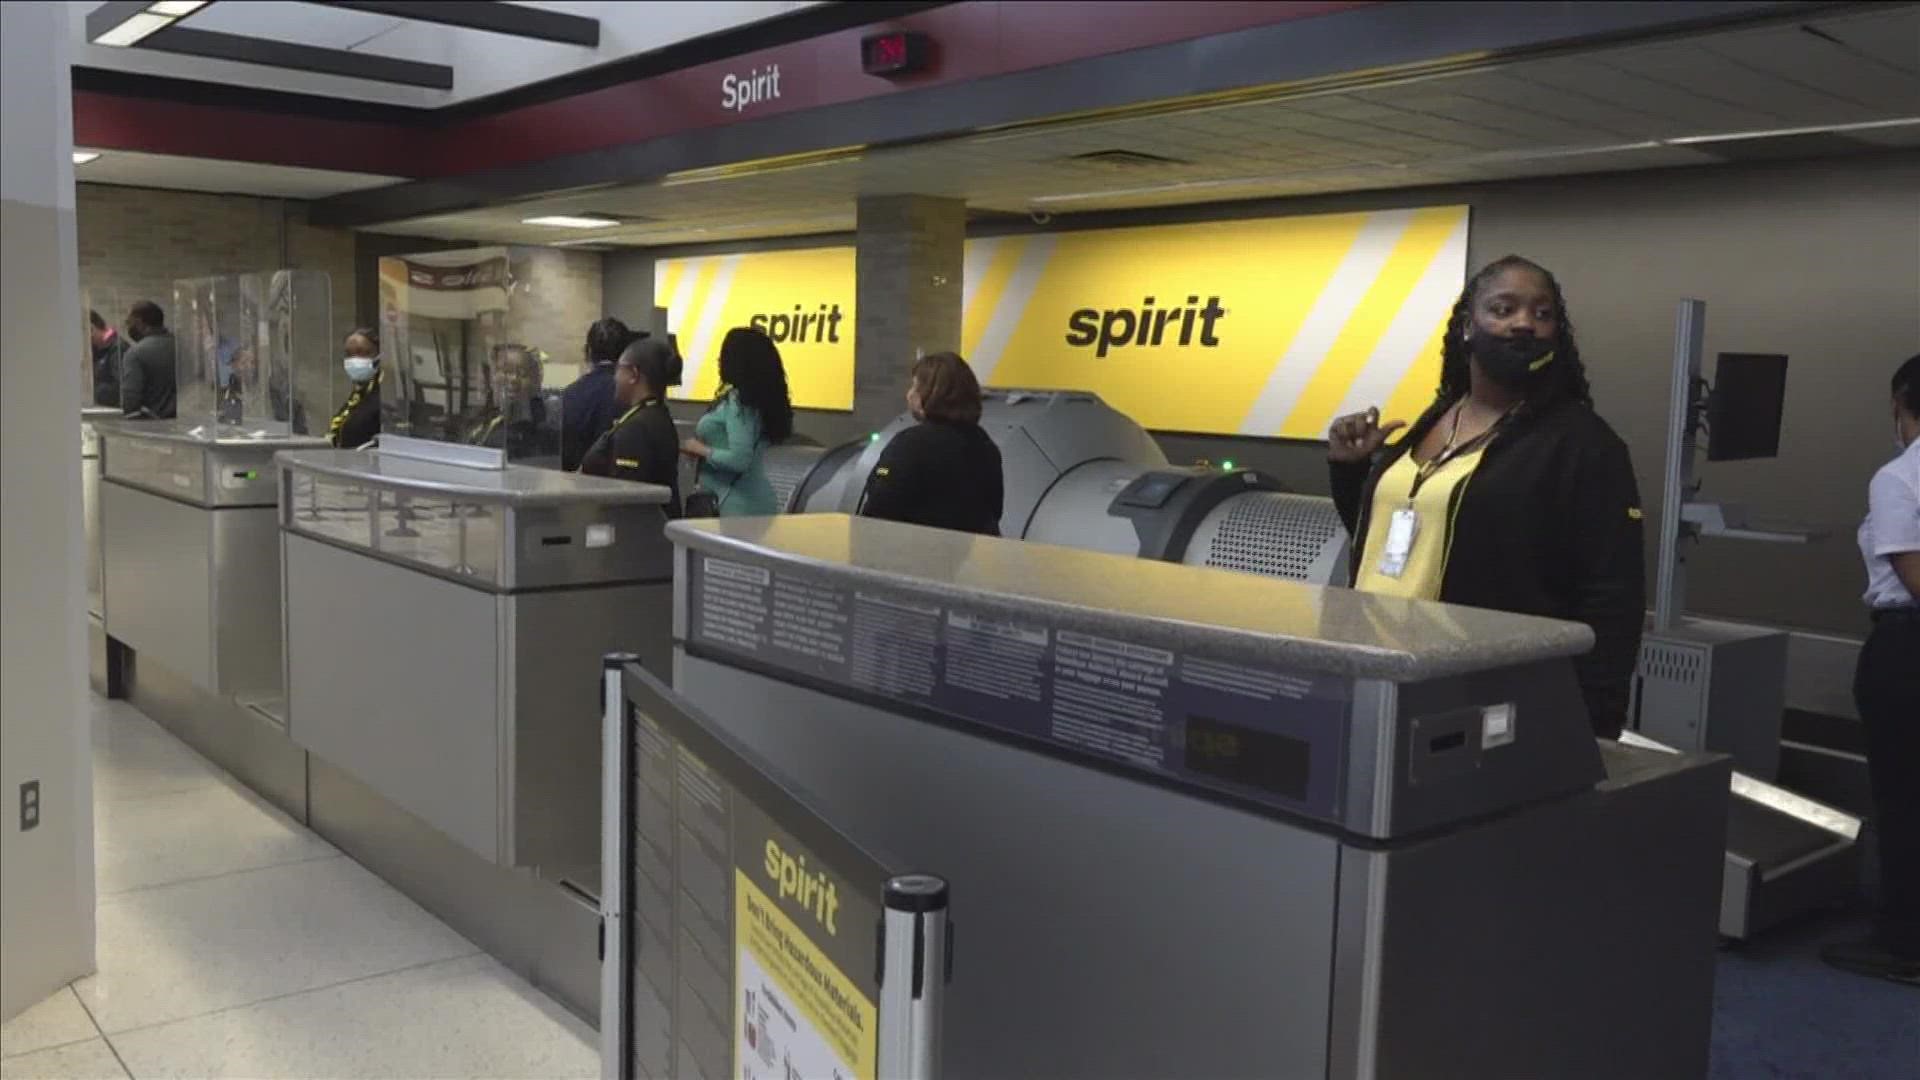 Spirit's first flight to Memphis landed around 9 a.m. Wednesday from Orlando, one of two cities the budget airline is serving from the Bluff City.